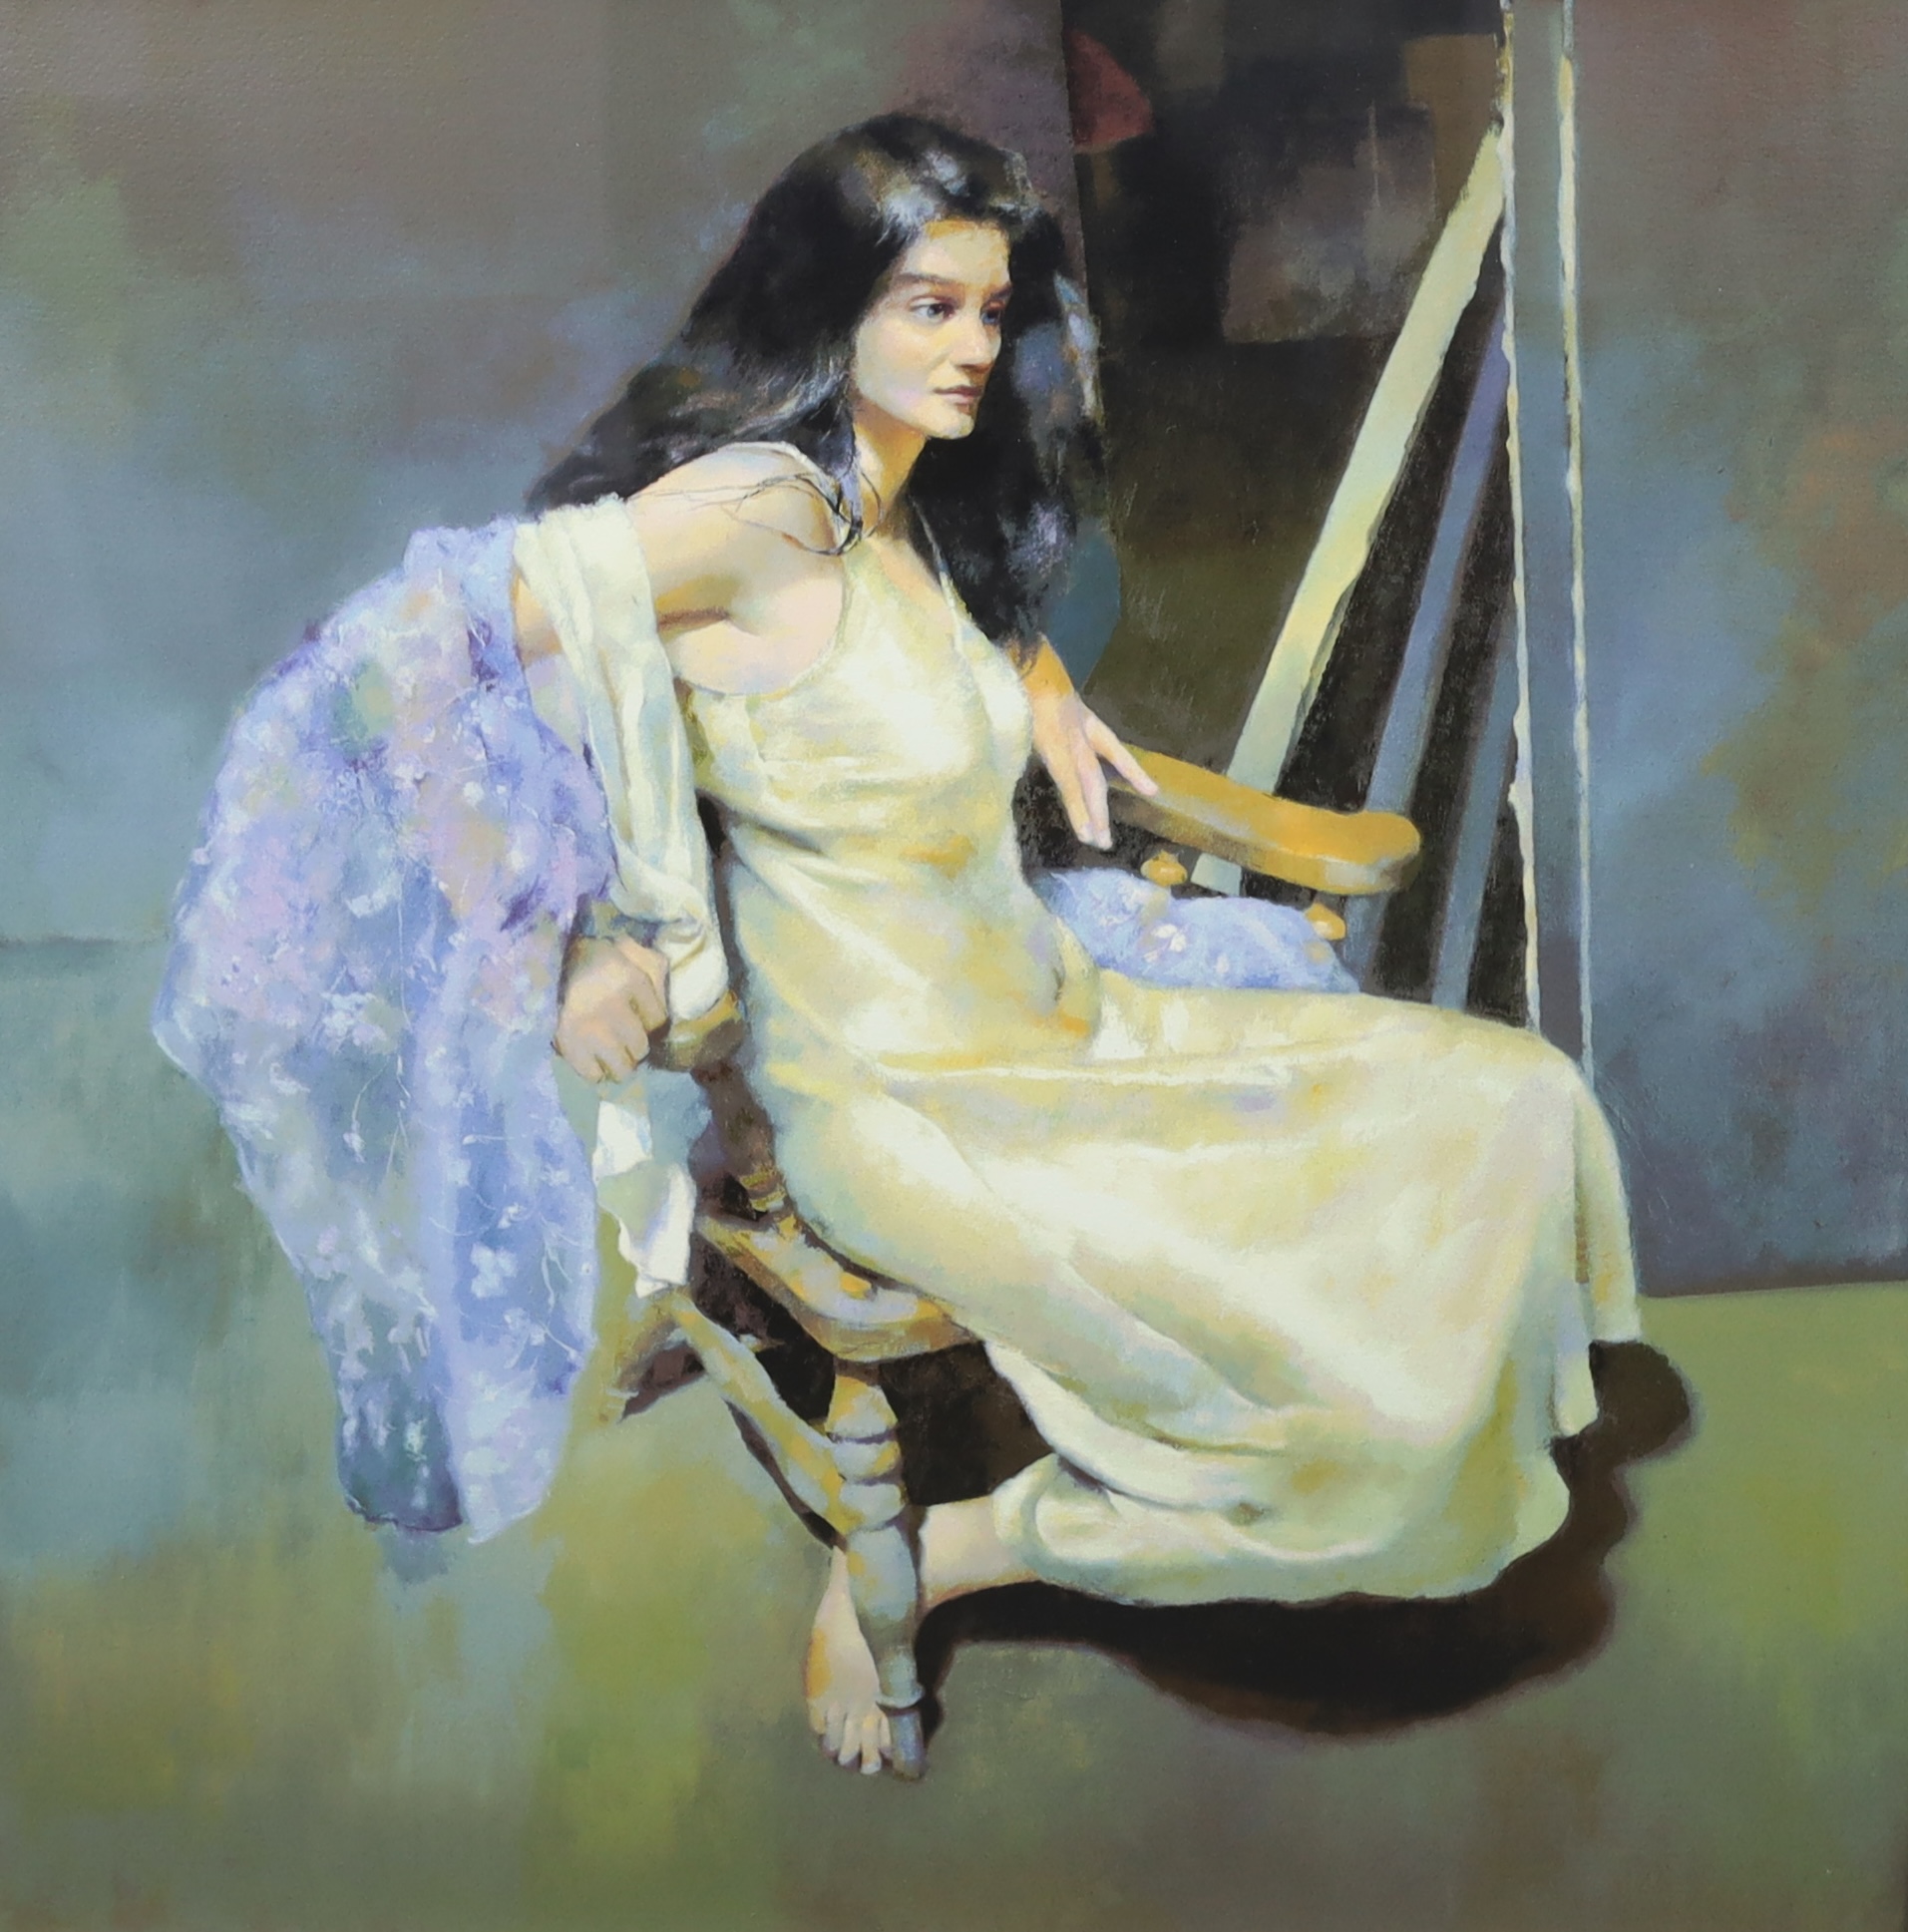 Robert Lenkiewicz (1941-2002), silkscreen, 'Ester seated by R.O. Lenkiewicz', signed in pencil and titled along with the name of the artist Ester Dallaunay, 11/475, 60 x 60cm. Condition - good, print is loose within the